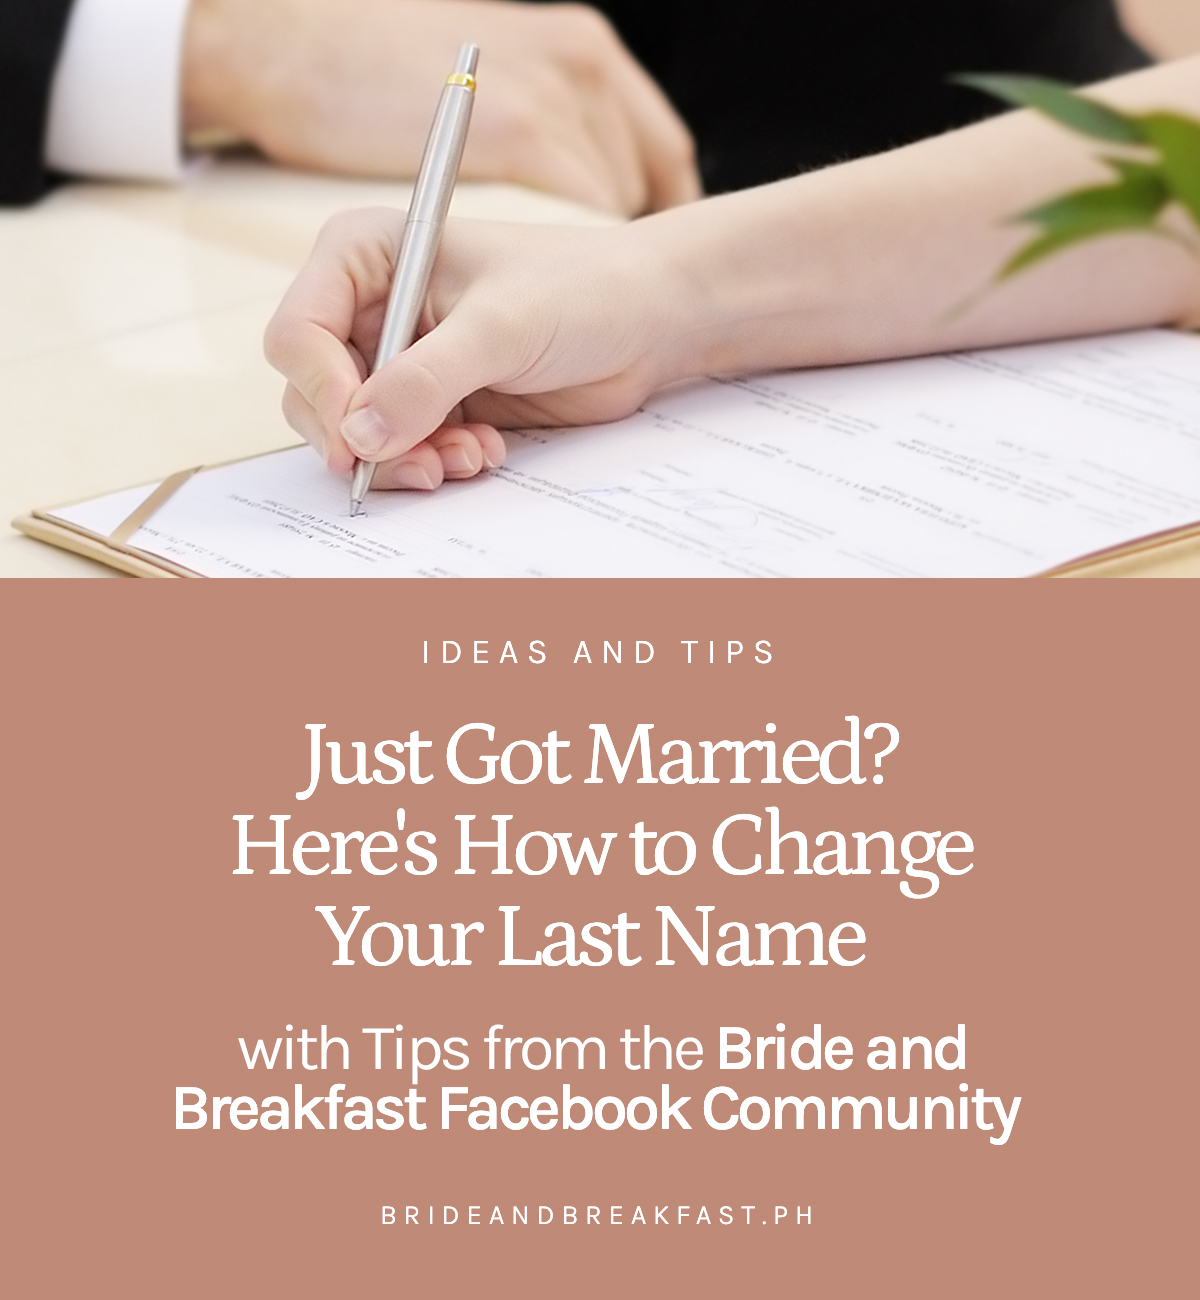 Just Got Married? Here's How to Change Your Last Name with Tips from the Bride and Breakfast Facebook Community